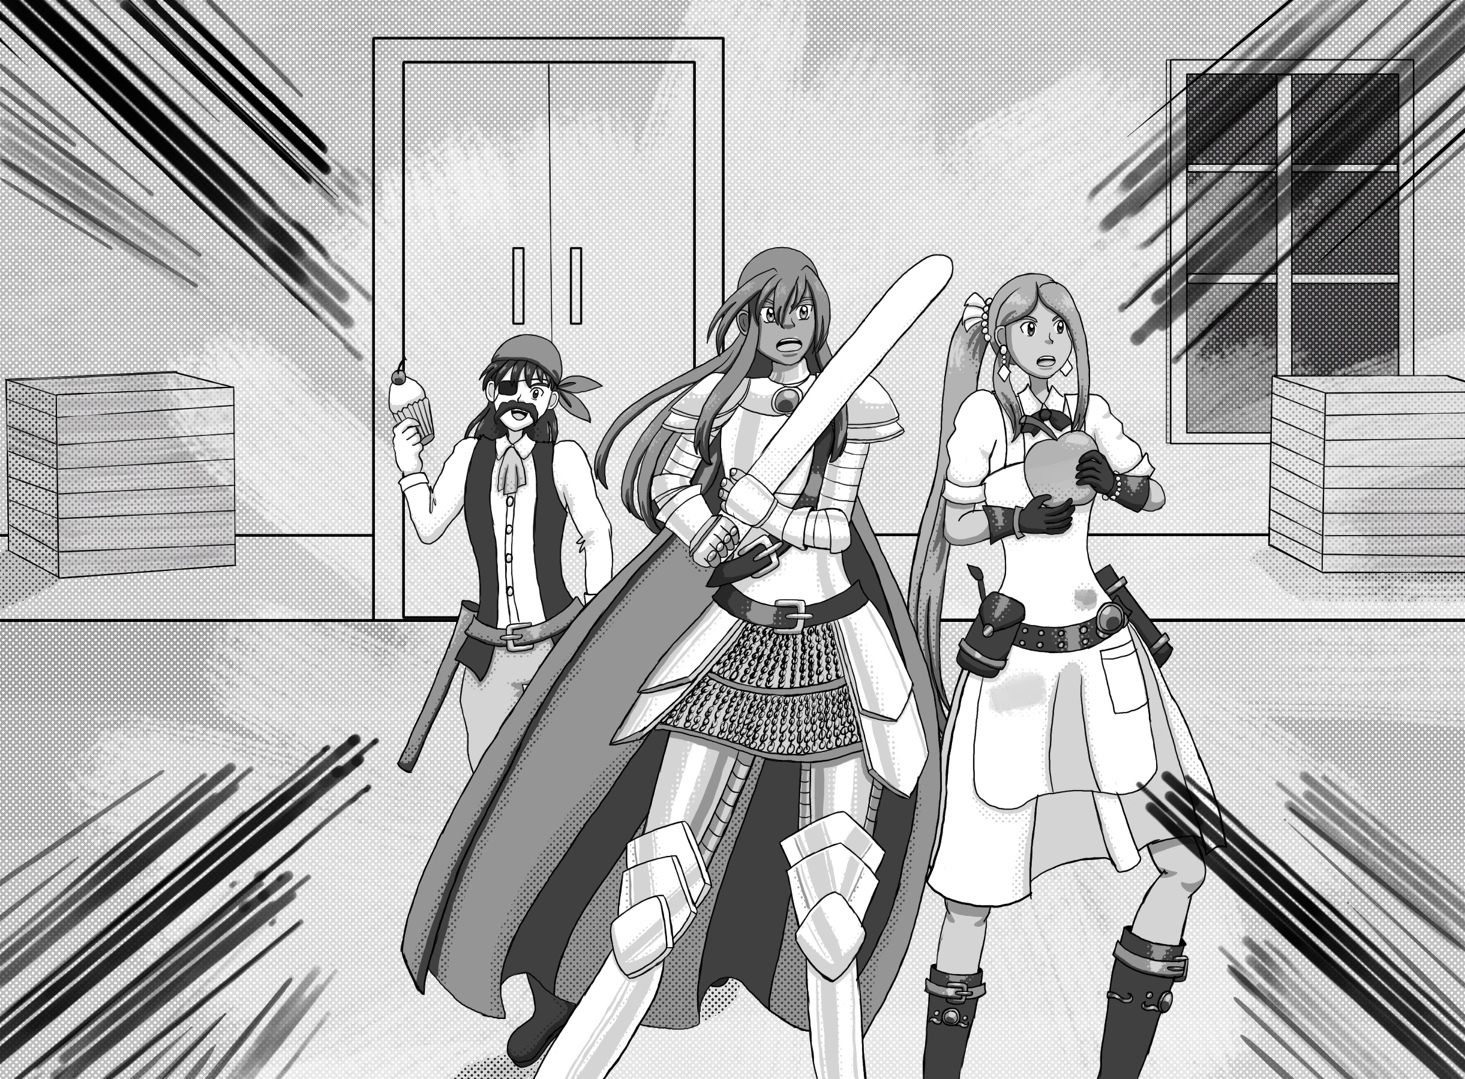 Image description: A grayscale and half-tone drawing showing three characters defending a mess hall with crates of food in the background. Alfbern is dressed as a pirate and holding a cupcake as a weapon. Monica is dressed as a knight and wielding a baguette. Claudia is dressed like an artisan and is holding a cannonball-sized apple.